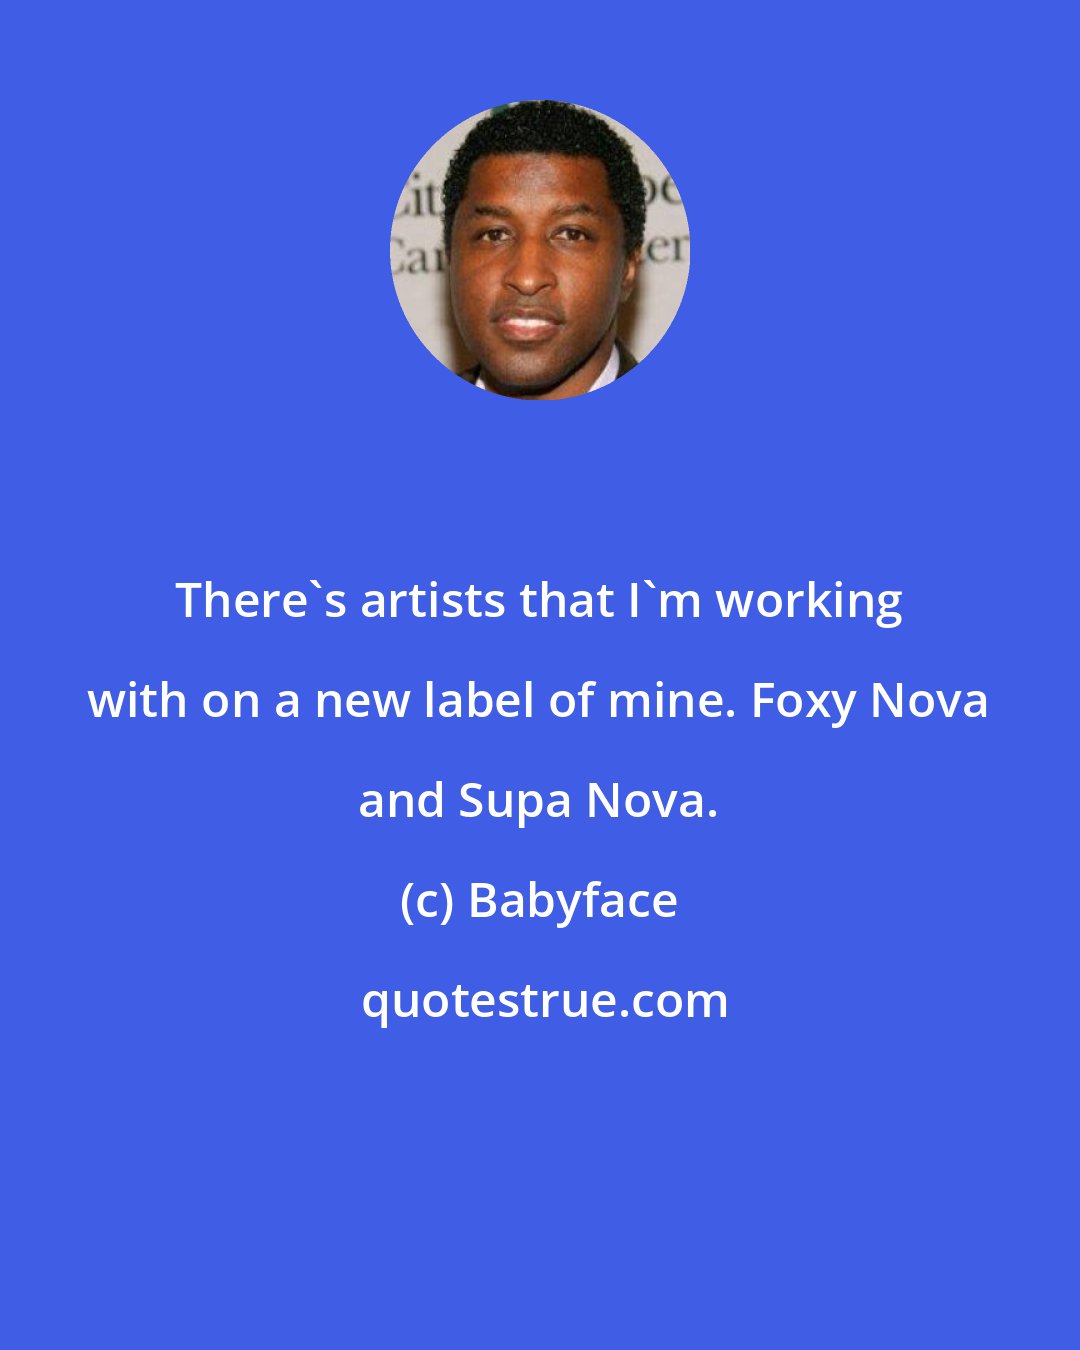 Babyface: There's artists that I'm working with on a new label of mine. Foxy Nova and Supa Nova.